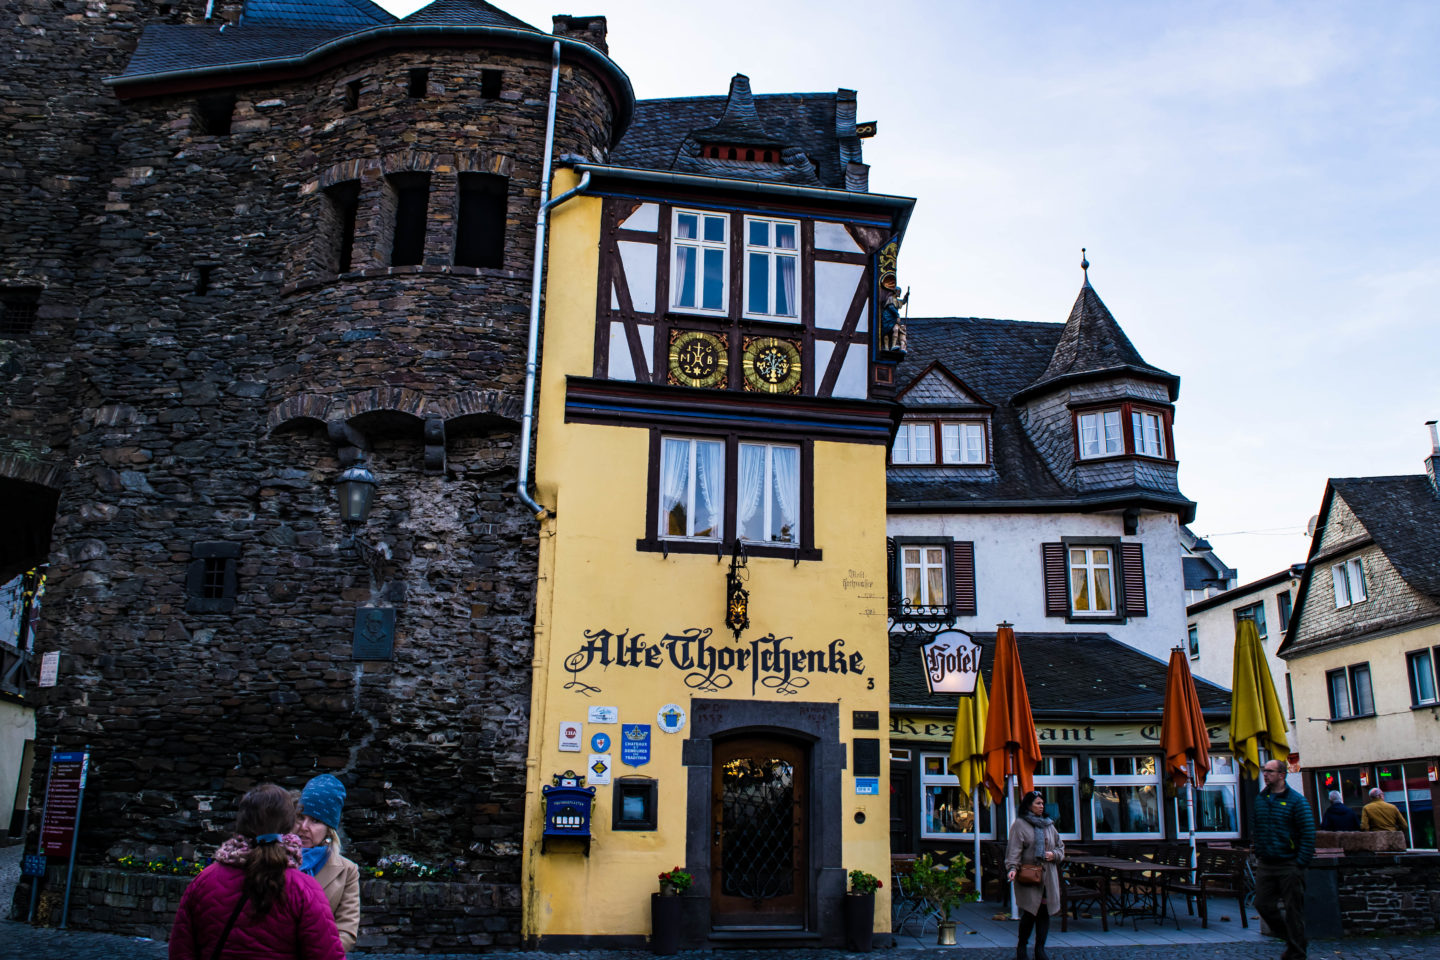 Cochem is full of half-timbered buildings, so you'll definitely get your fairy tale German town fix. 